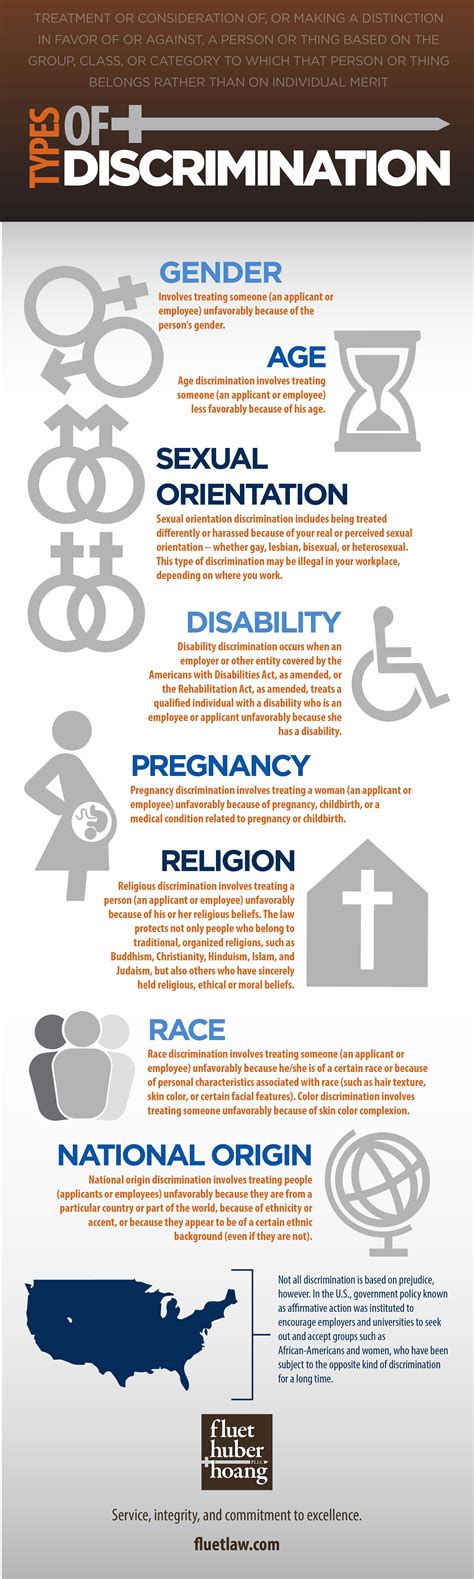 type of discrimination infographic visualistan free download nude